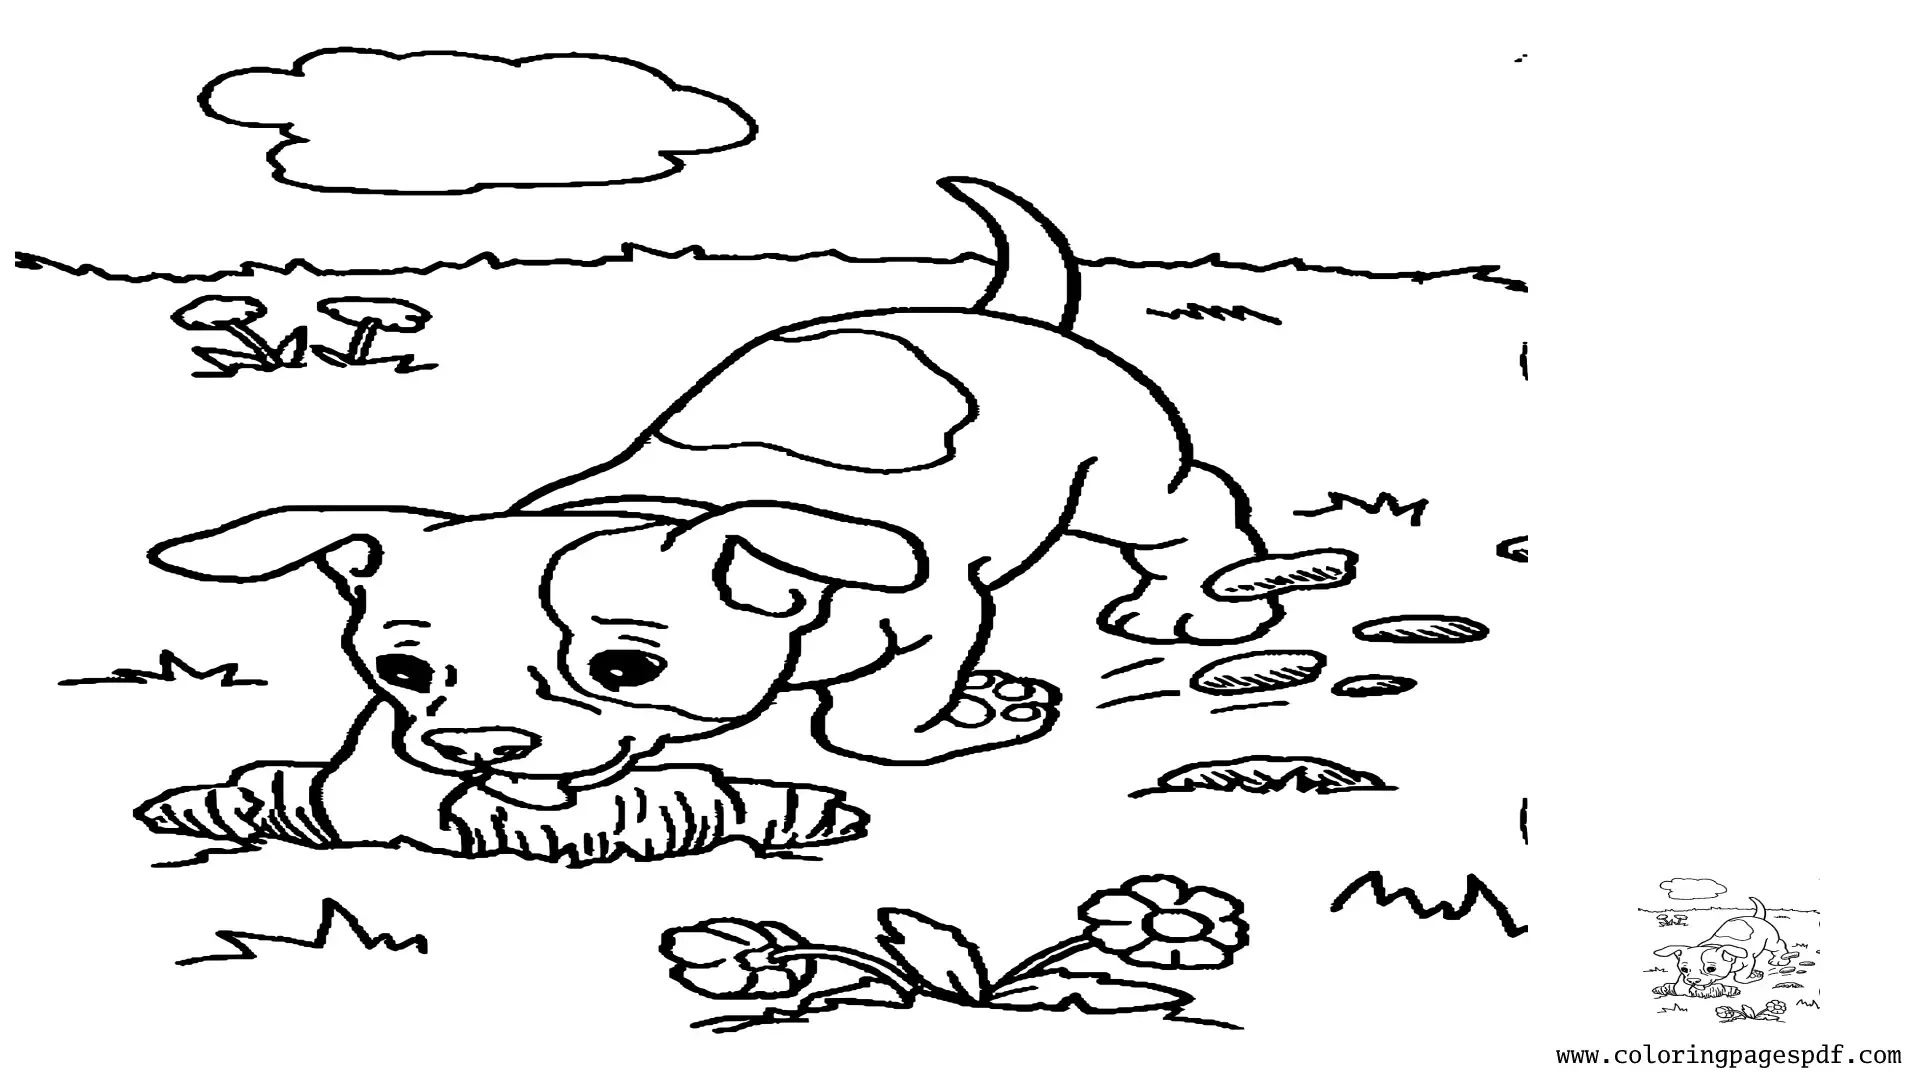 Coloring Pages Of A Puppy Digging A Hole